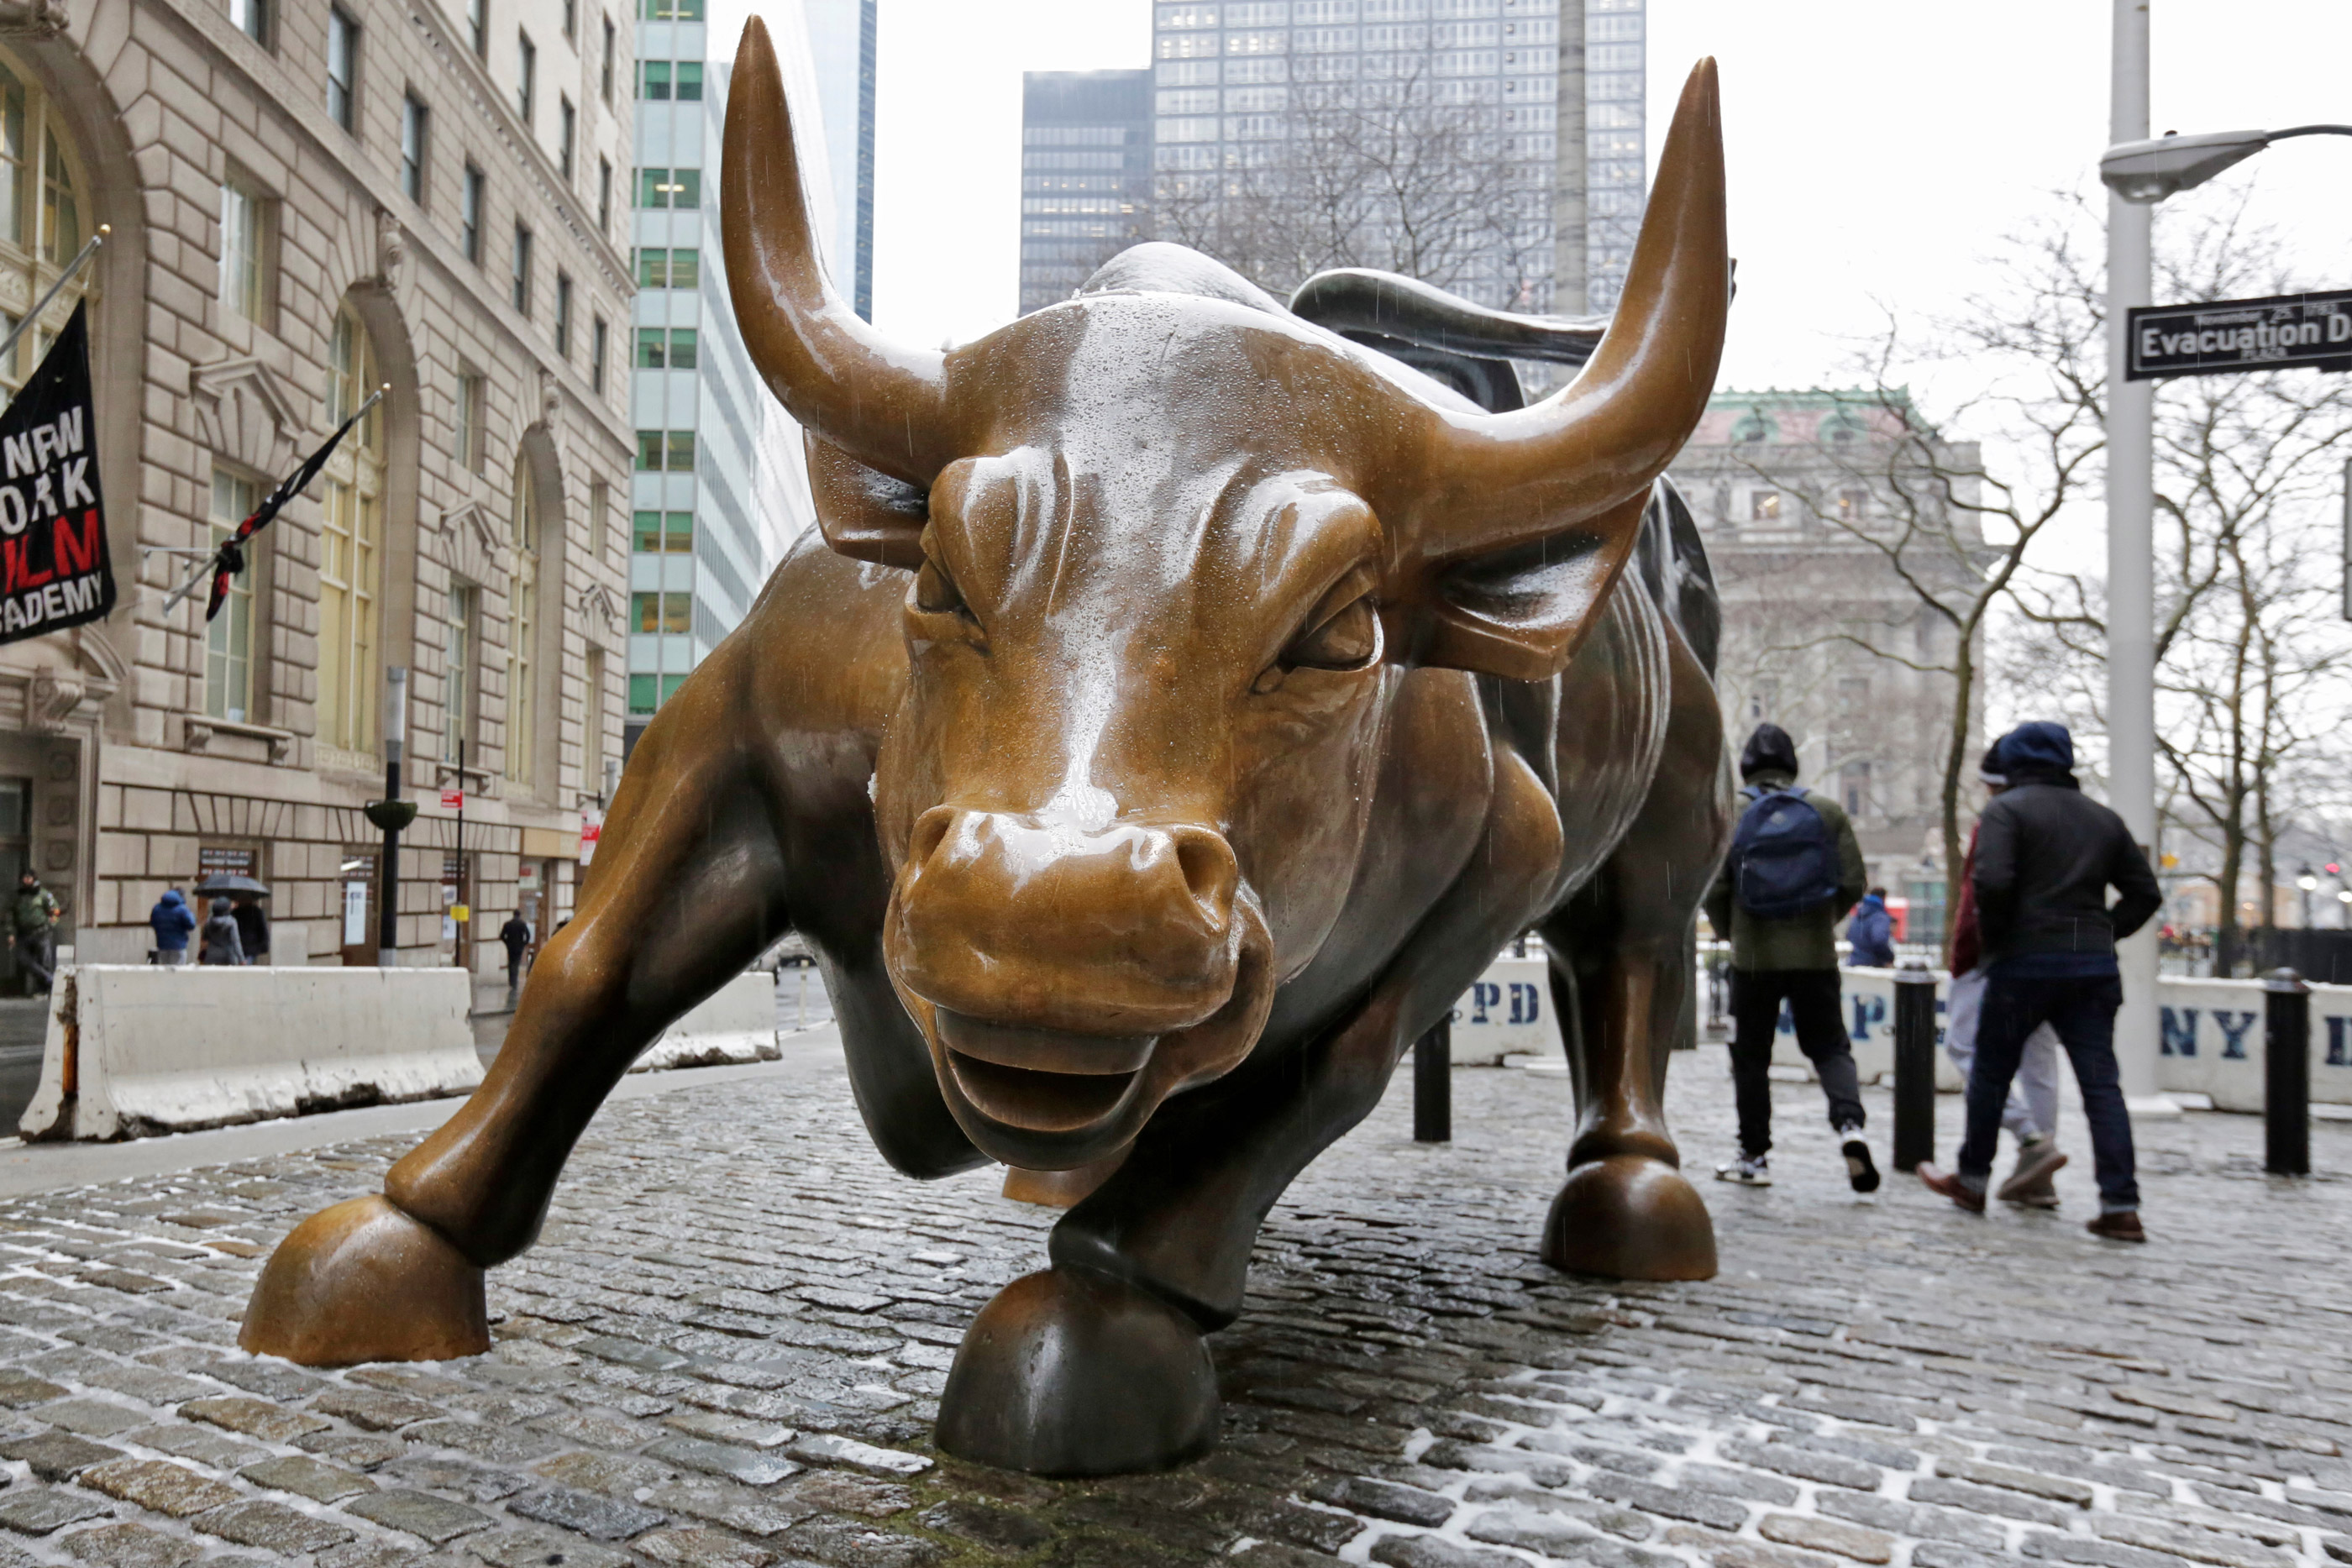 "A Rougher Road": 5 Investing Pros Predict Where the Stock Market Is Headed in 2019